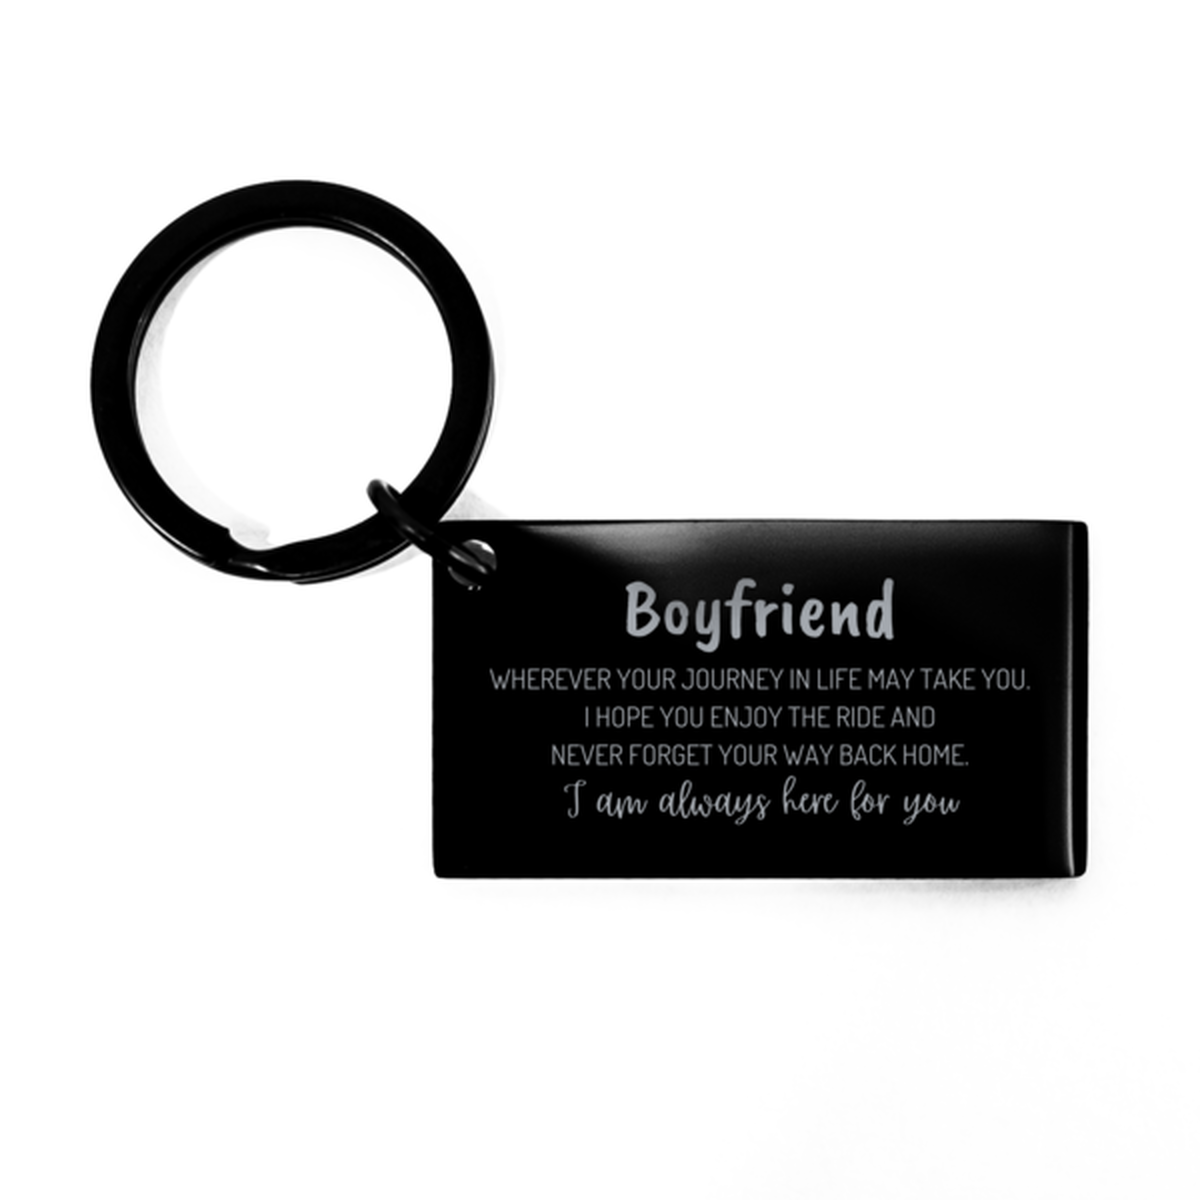 Boyfriend wherever your journey in life may take you, I am always here for you Boyfriend Keychain, Awesome Christmas Gifts For Boyfriend, Boyfriend Birthday Gifts for Men Women Family Loved One